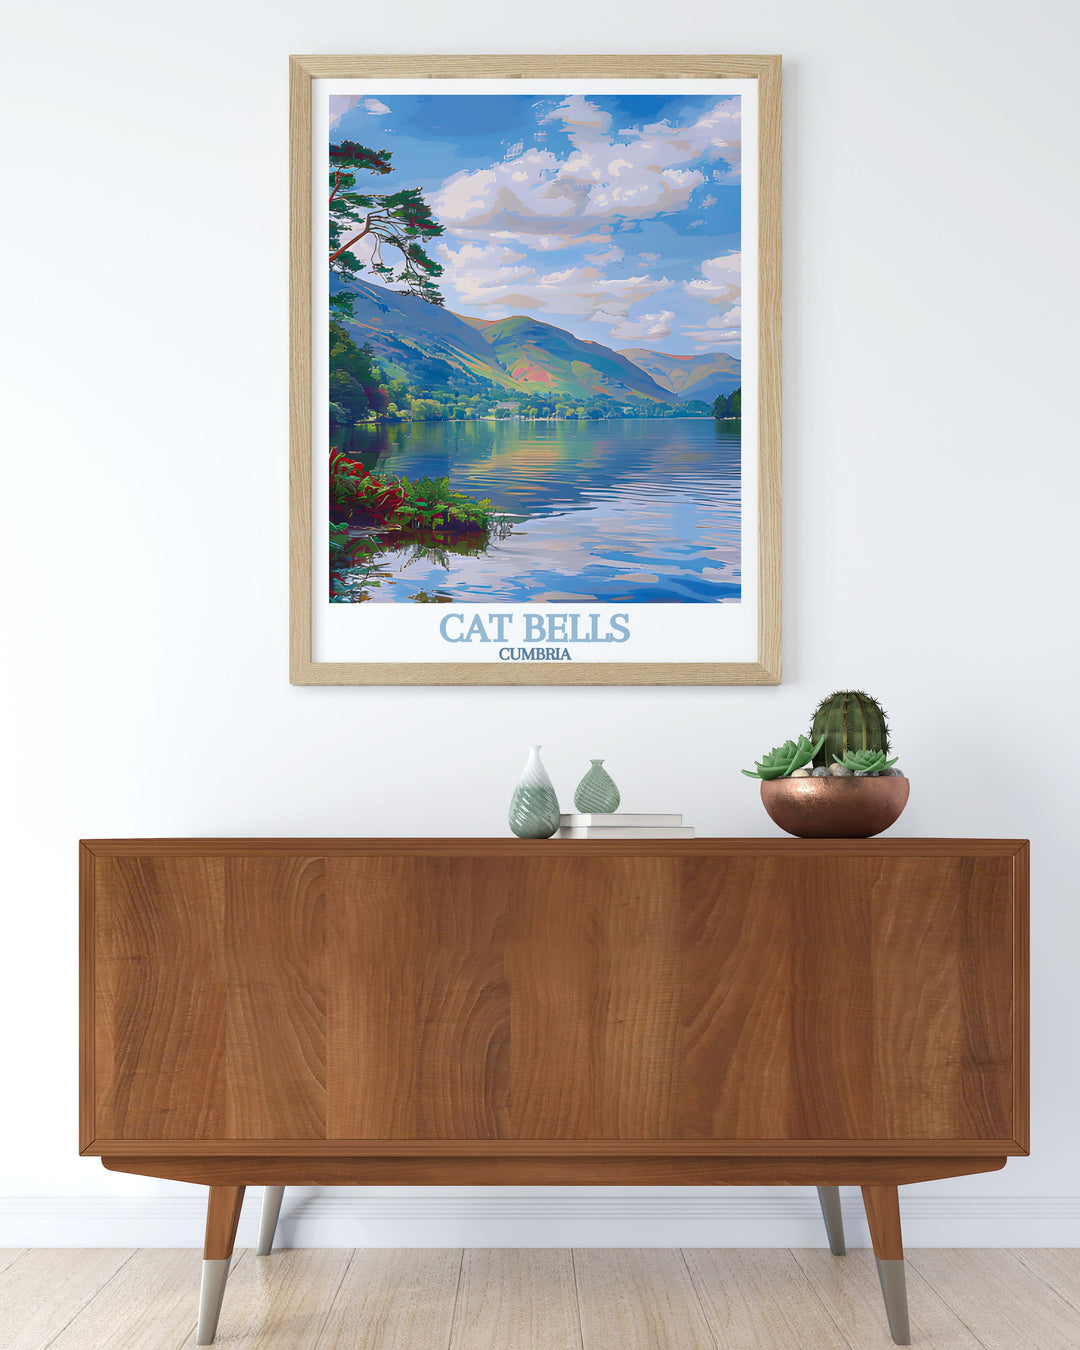 Discover the beauty of Derwentwater with our detailed and vibrant prints perfect for wall decor this travel poster brings the stunning scenery of Cat Bells Cumbria into your home making it an excellent gift for hikers and nature lovers.